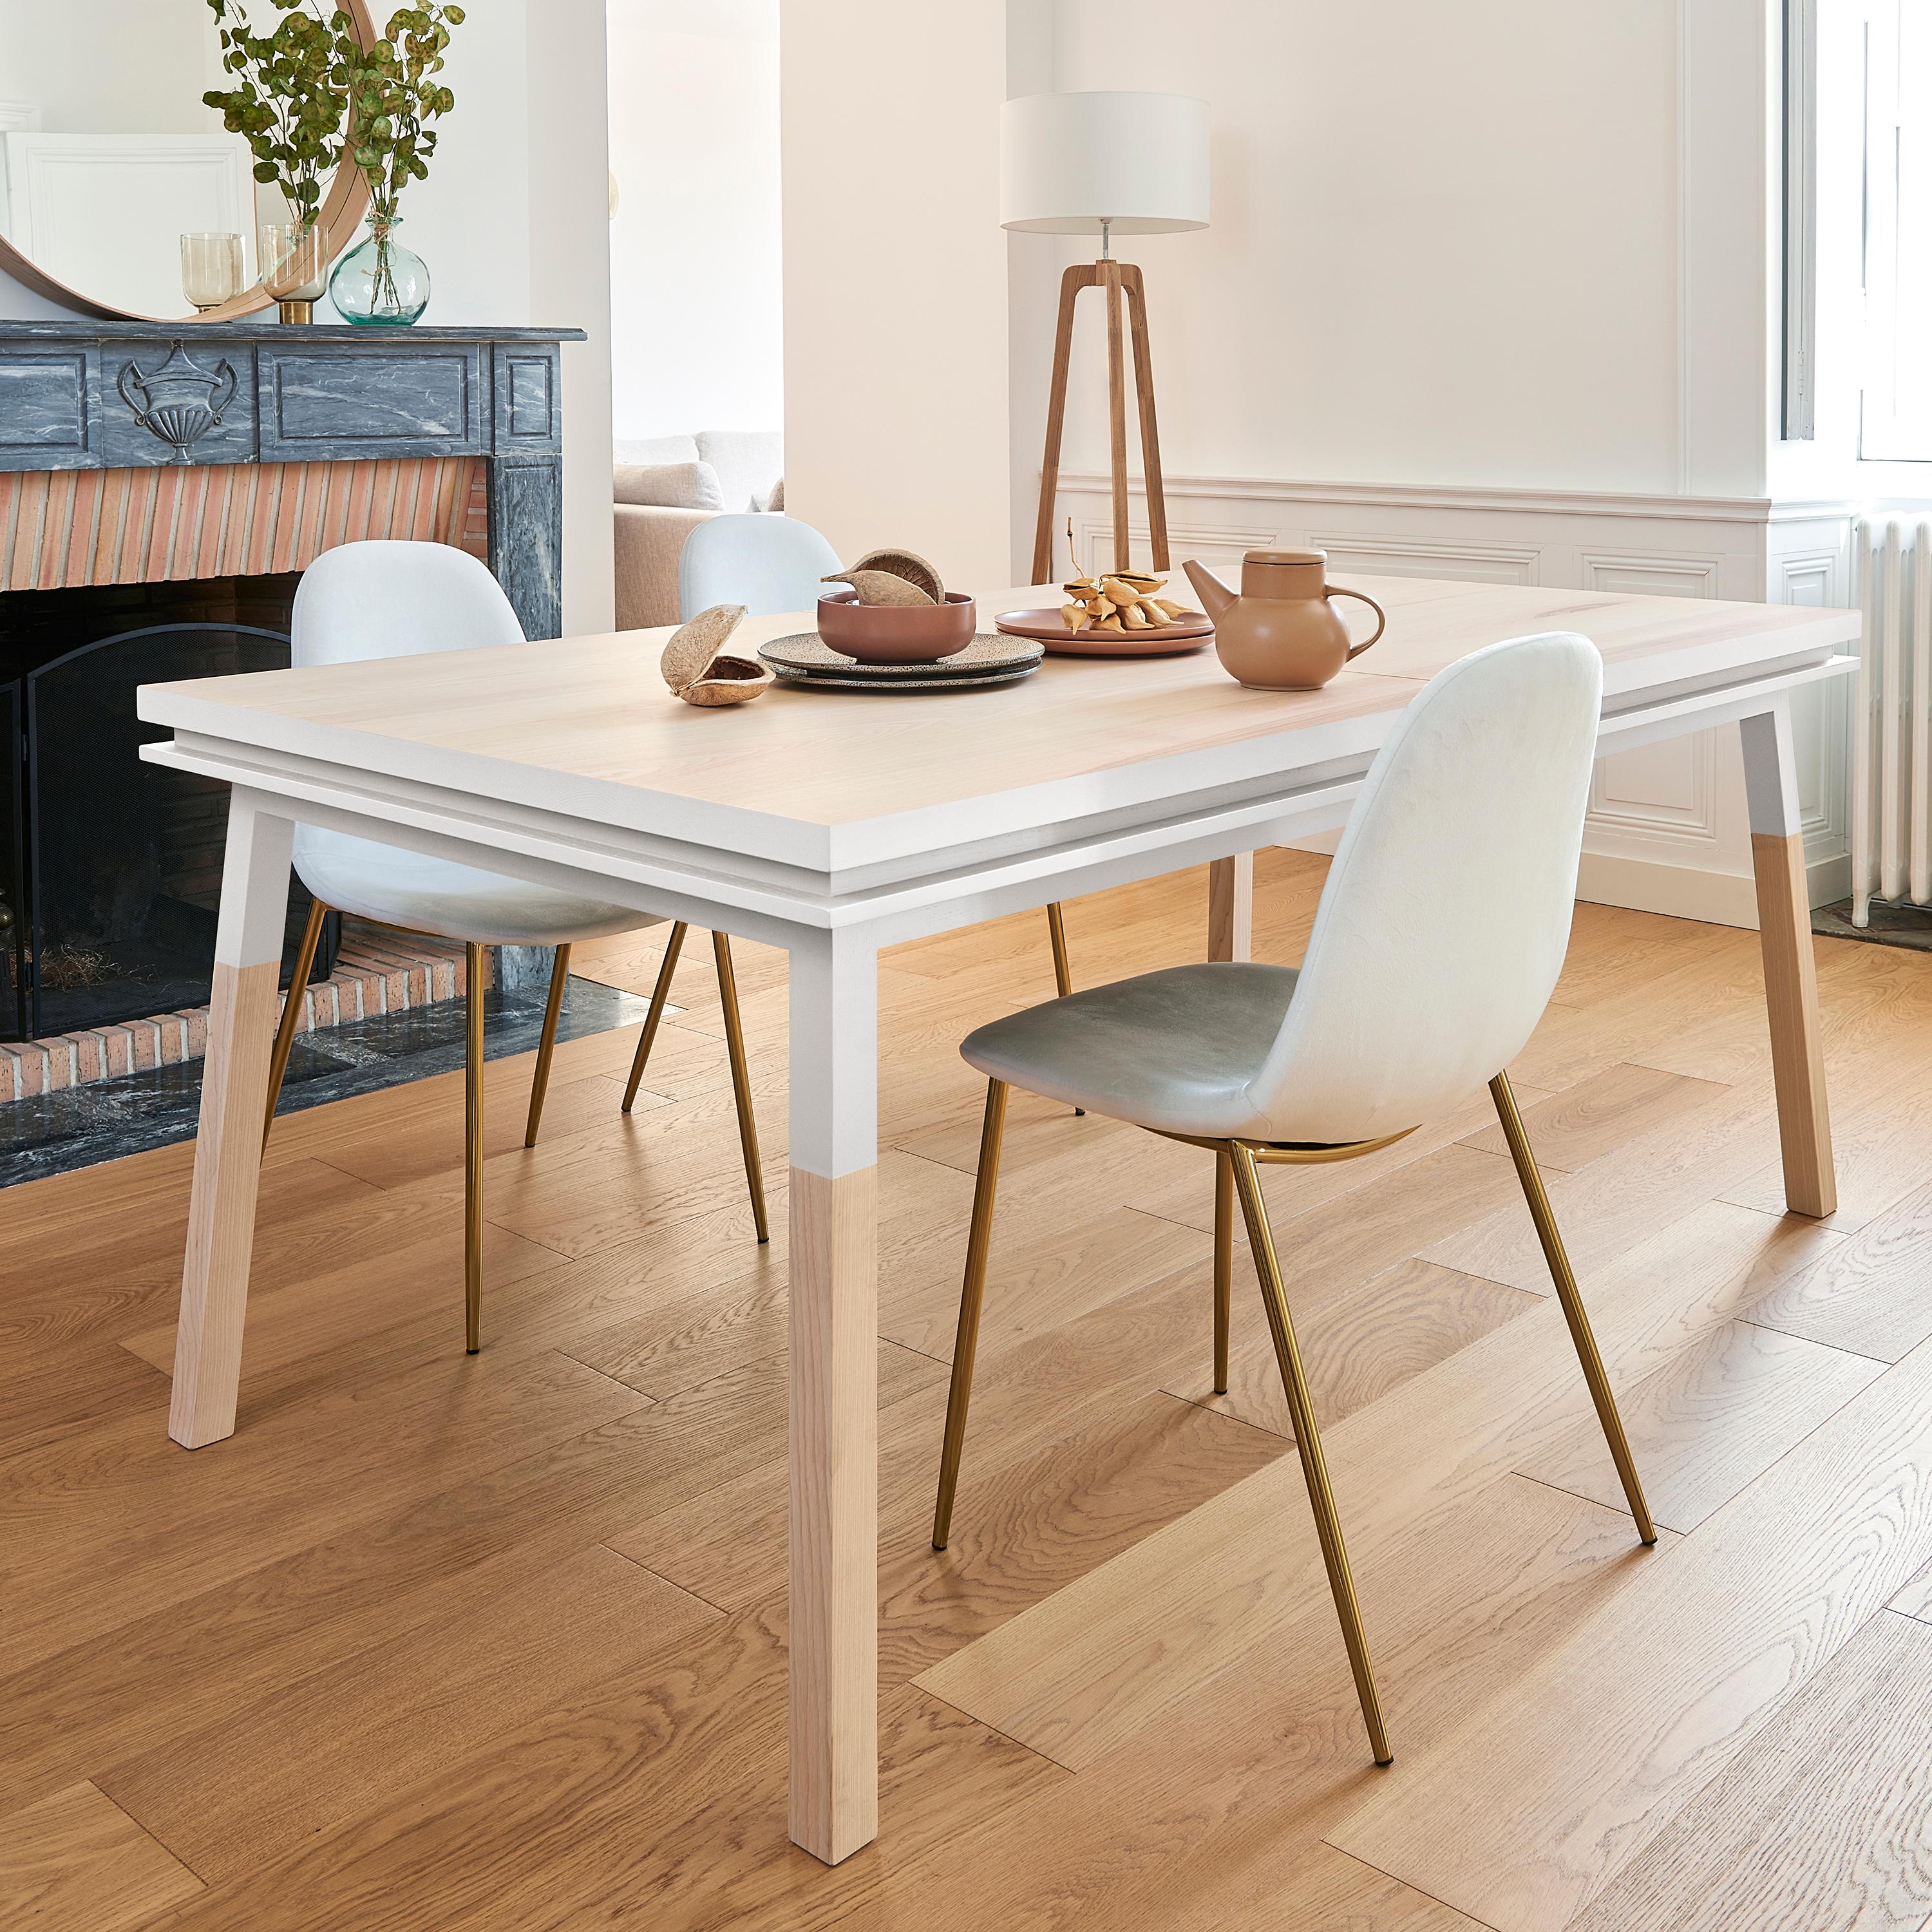 This extensible dining table is designed by Eric Gizard in Paris. 

It is made of 100% solid ash wood from sustainably managed and PEFC certified French forests.
Length: closed 200 cm / 78.7